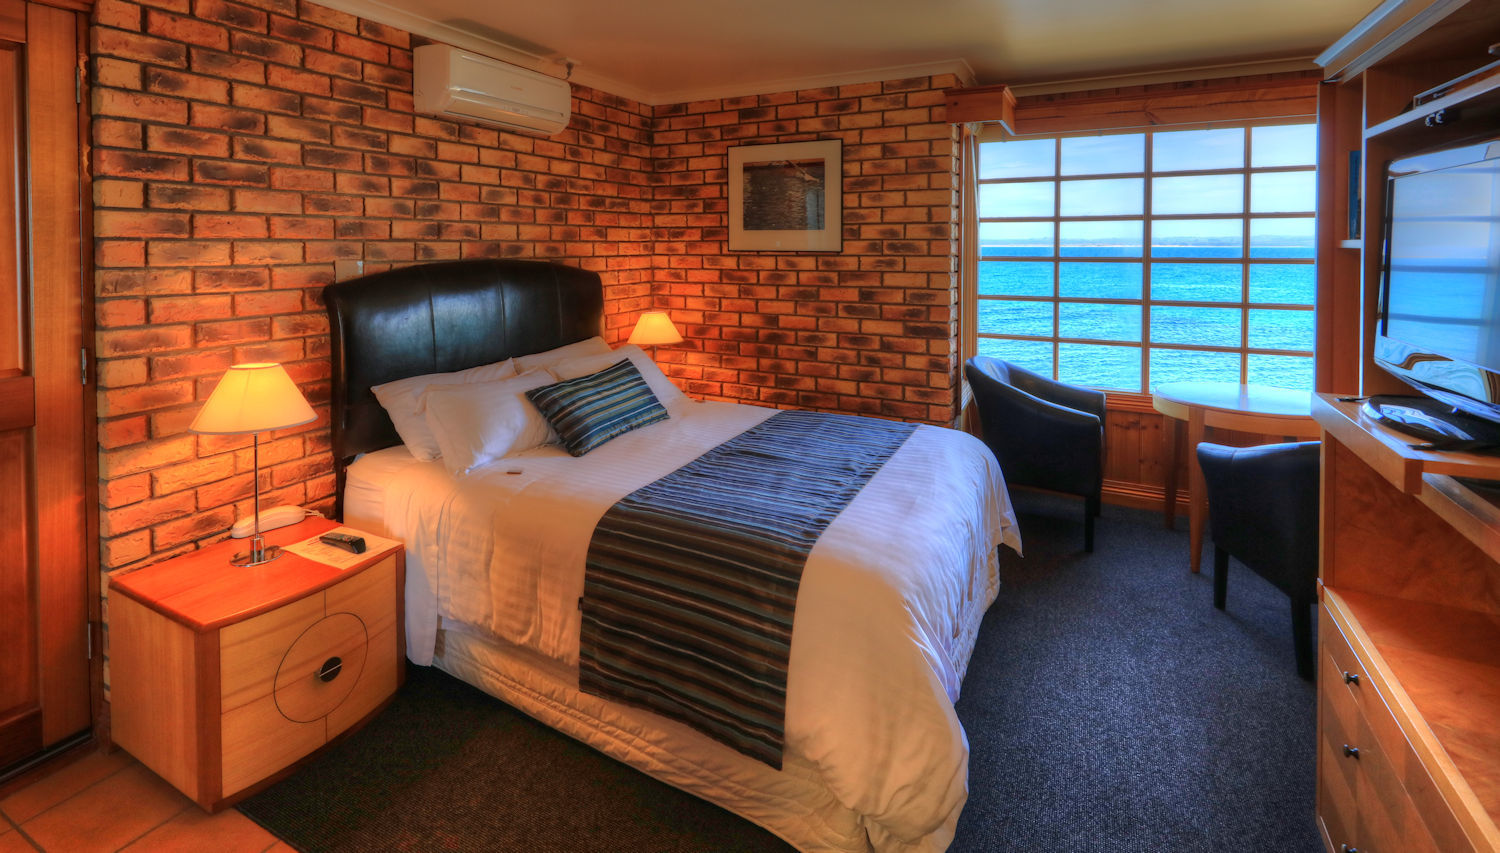 Stanley Village Waterfront Accommodation - Waterfront Suites